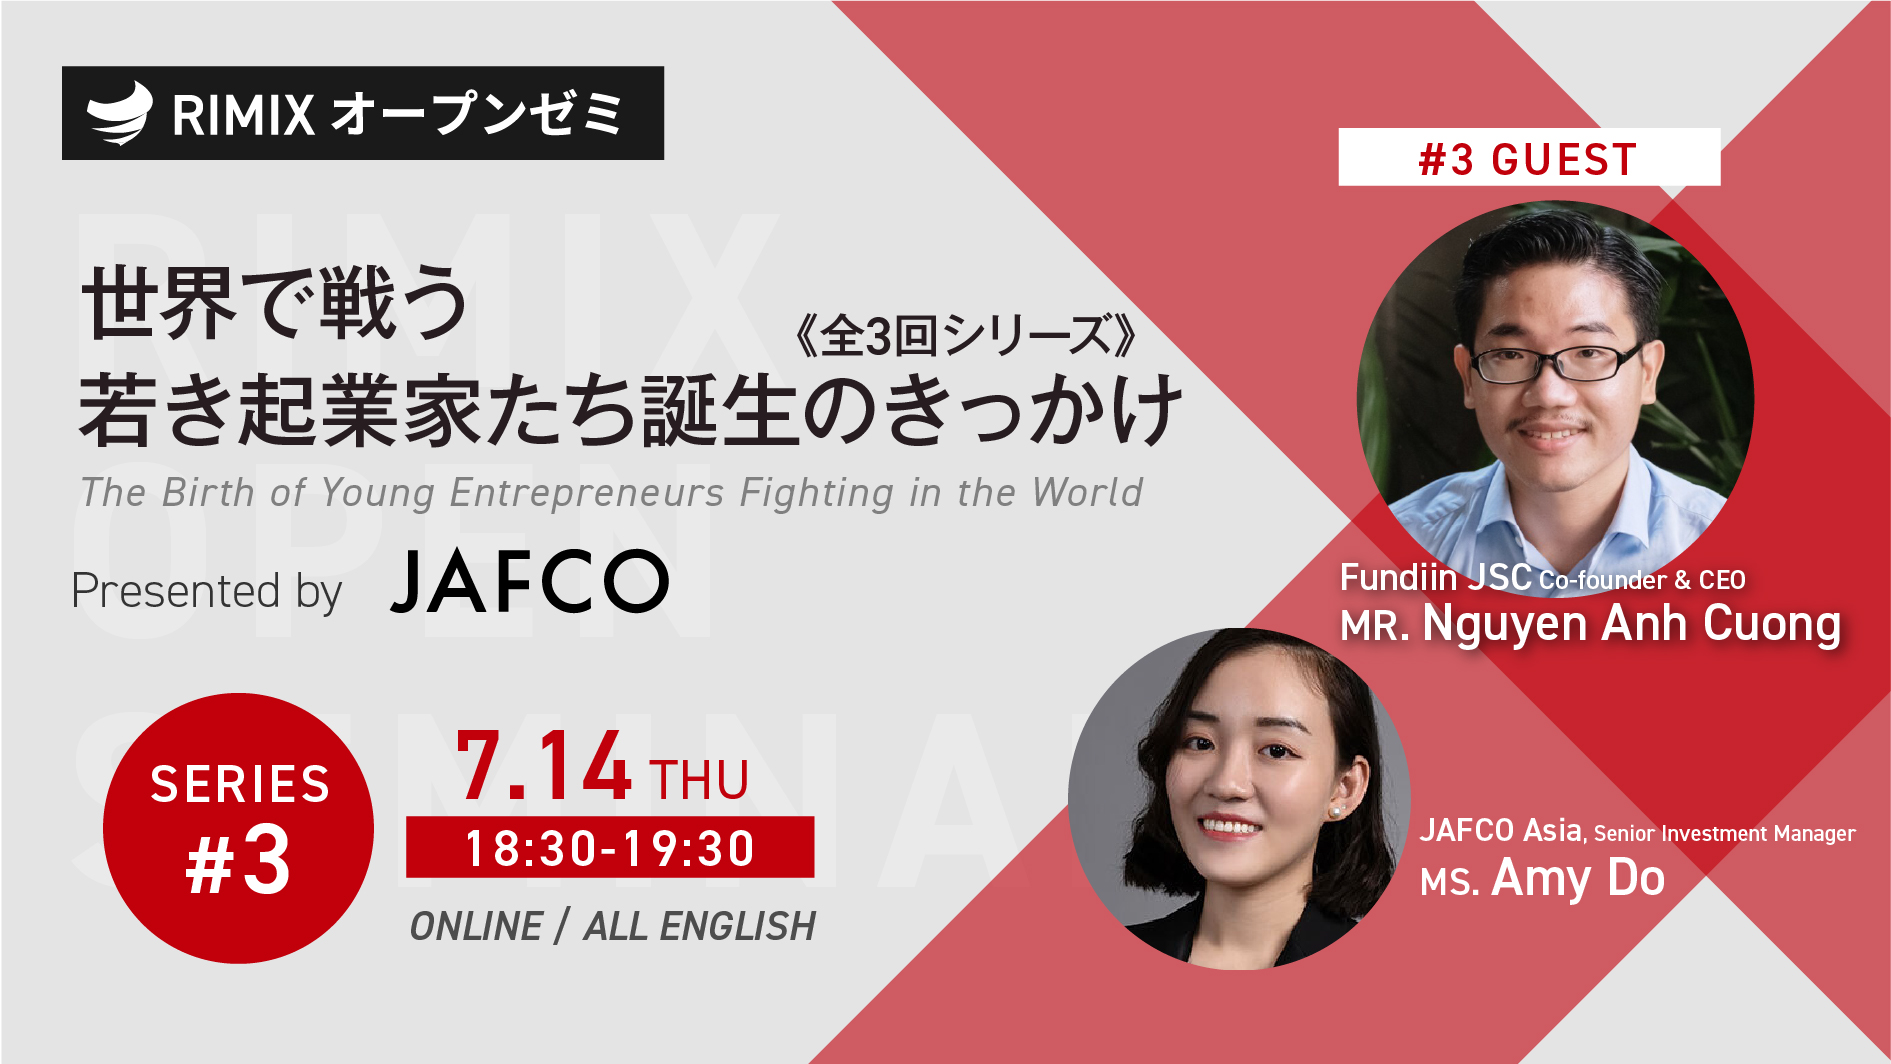 【RIMIXオープンゼミ】世界で戦う若き起業家たち誕生のきっかけ Presented by JAFCO Asia《シリーズ第3回｜Fundiin JSC Co-founder & CEO Mr. Nguyen Anh Cuong》